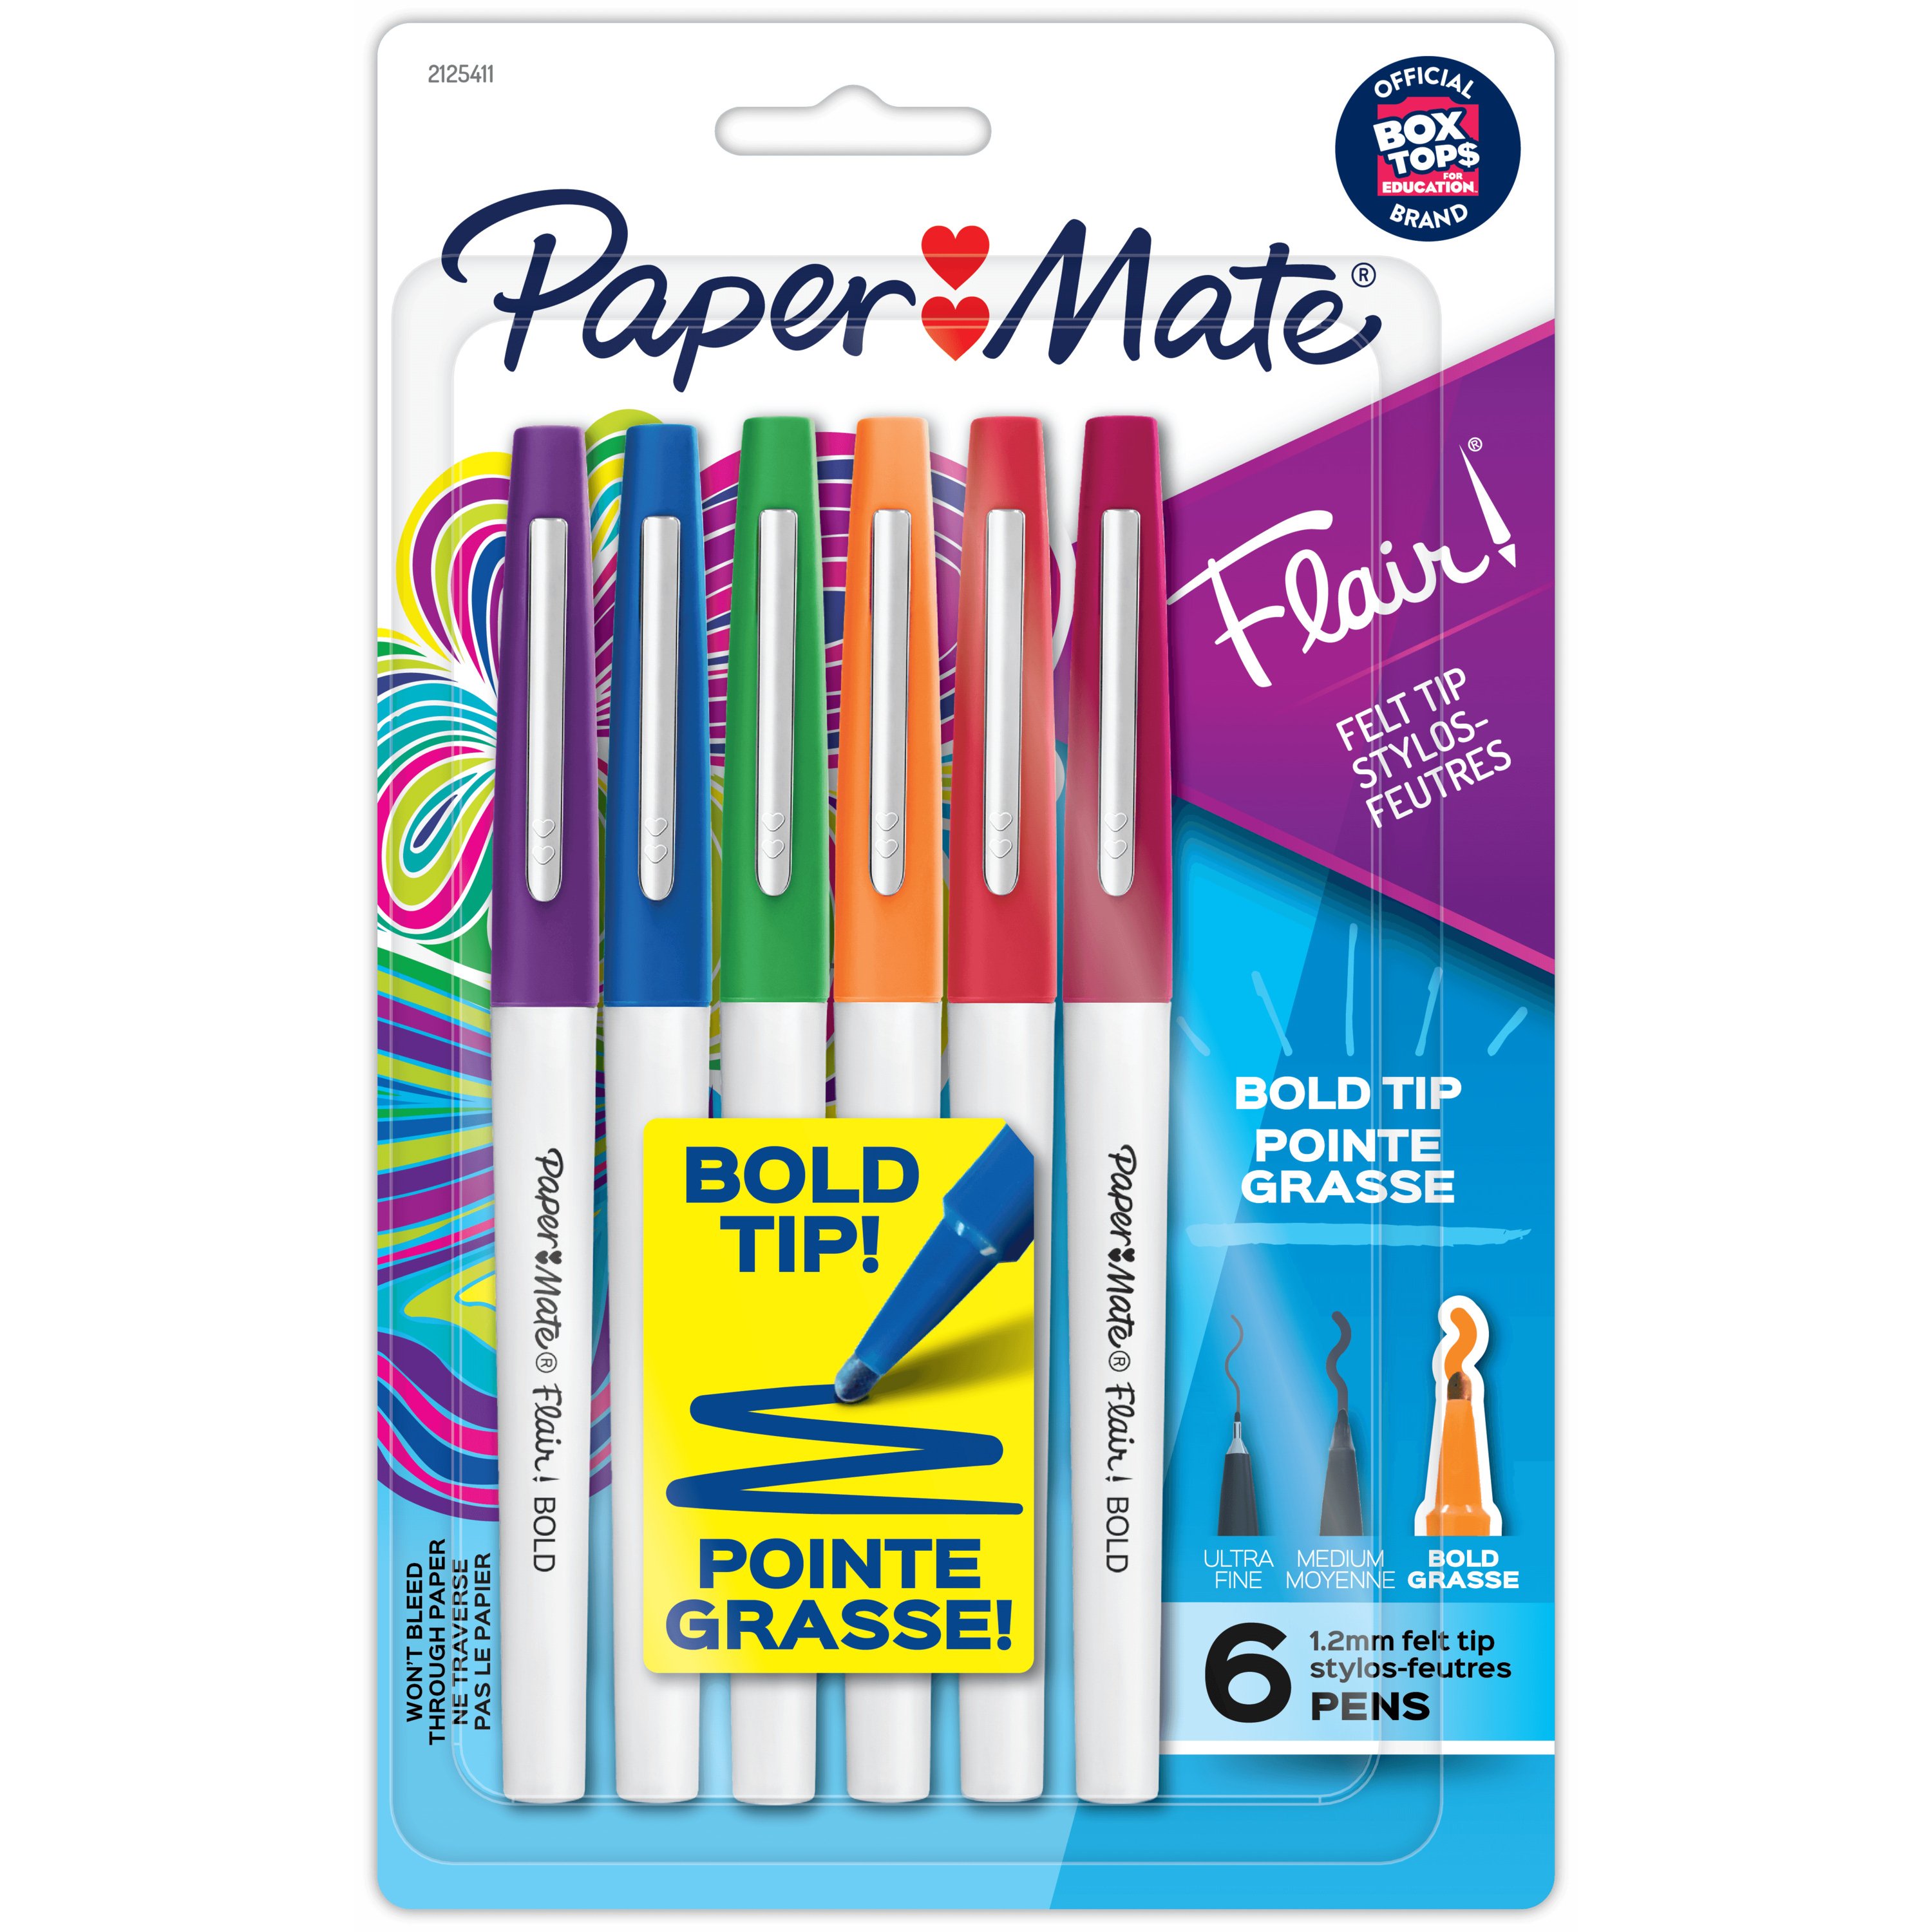 Paper Mate Flair Felt Tip Pens Bold Tip Assorted Colors 1.2 mm 4 Count 